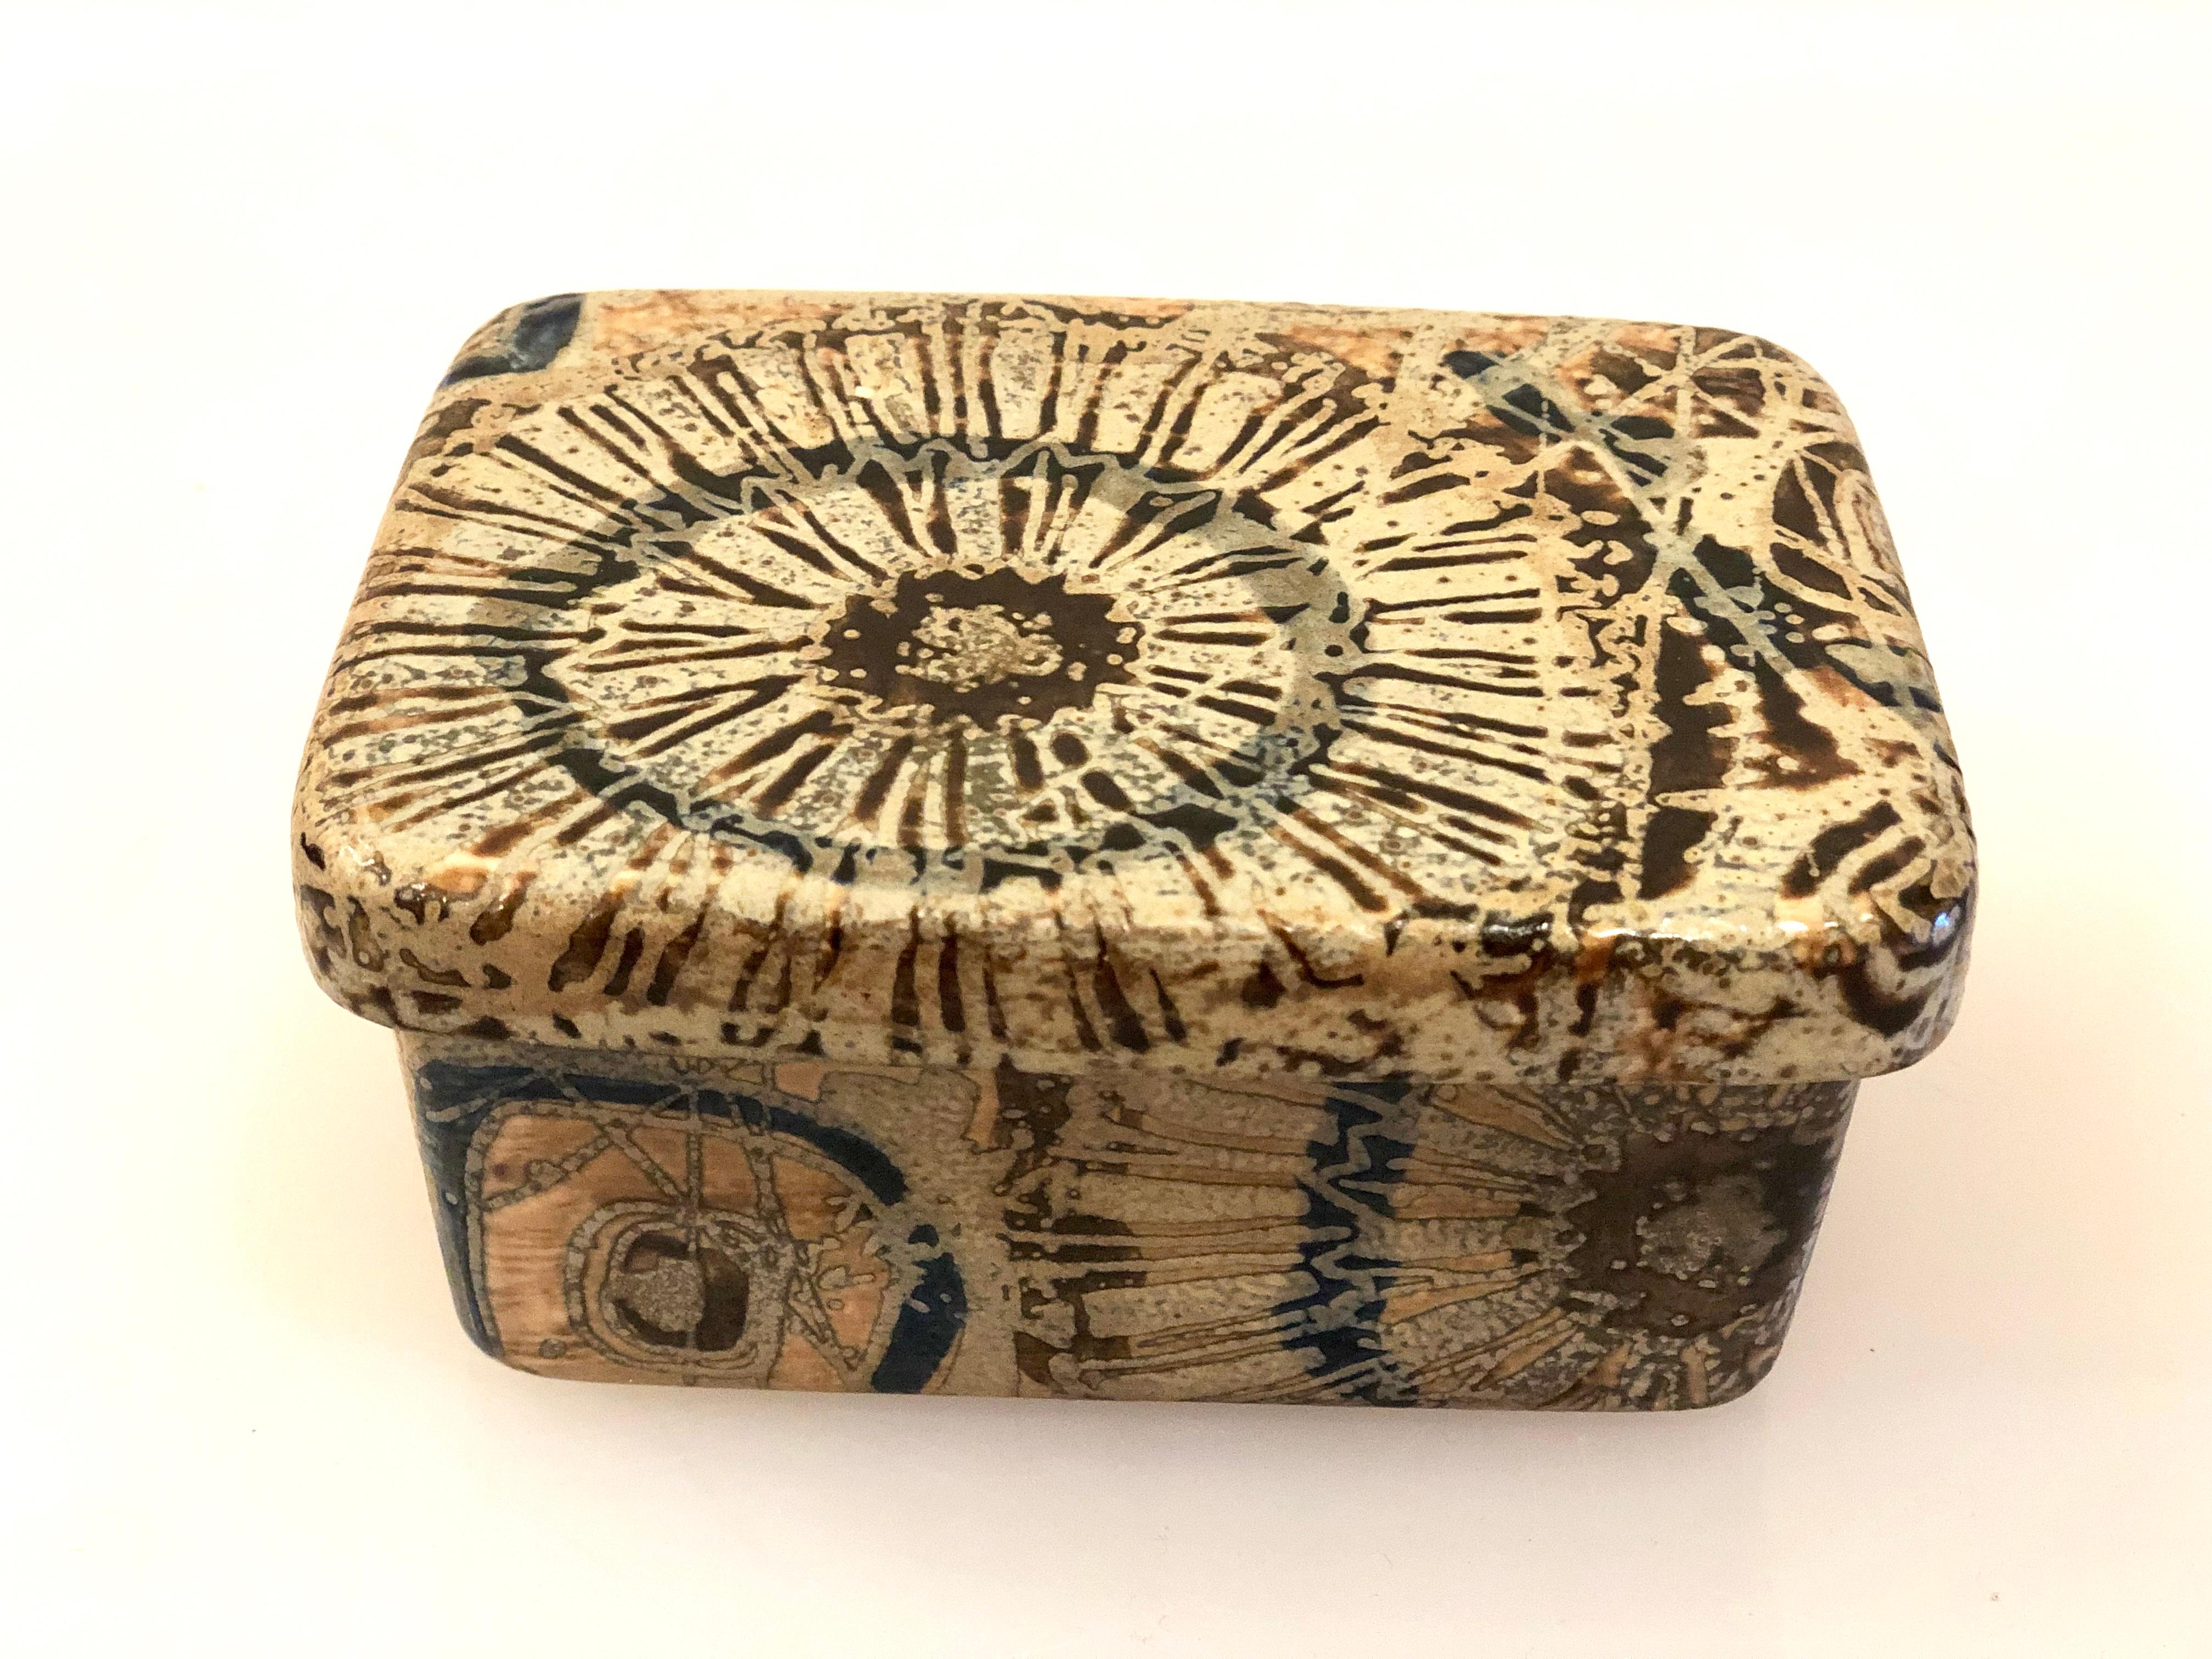 Whimsical ceramic small box designed by Nils Thorsson for Royal Copenhagen, circa 1950s, nice abstract design in great condition, very collectible piece. Signed and numbered.